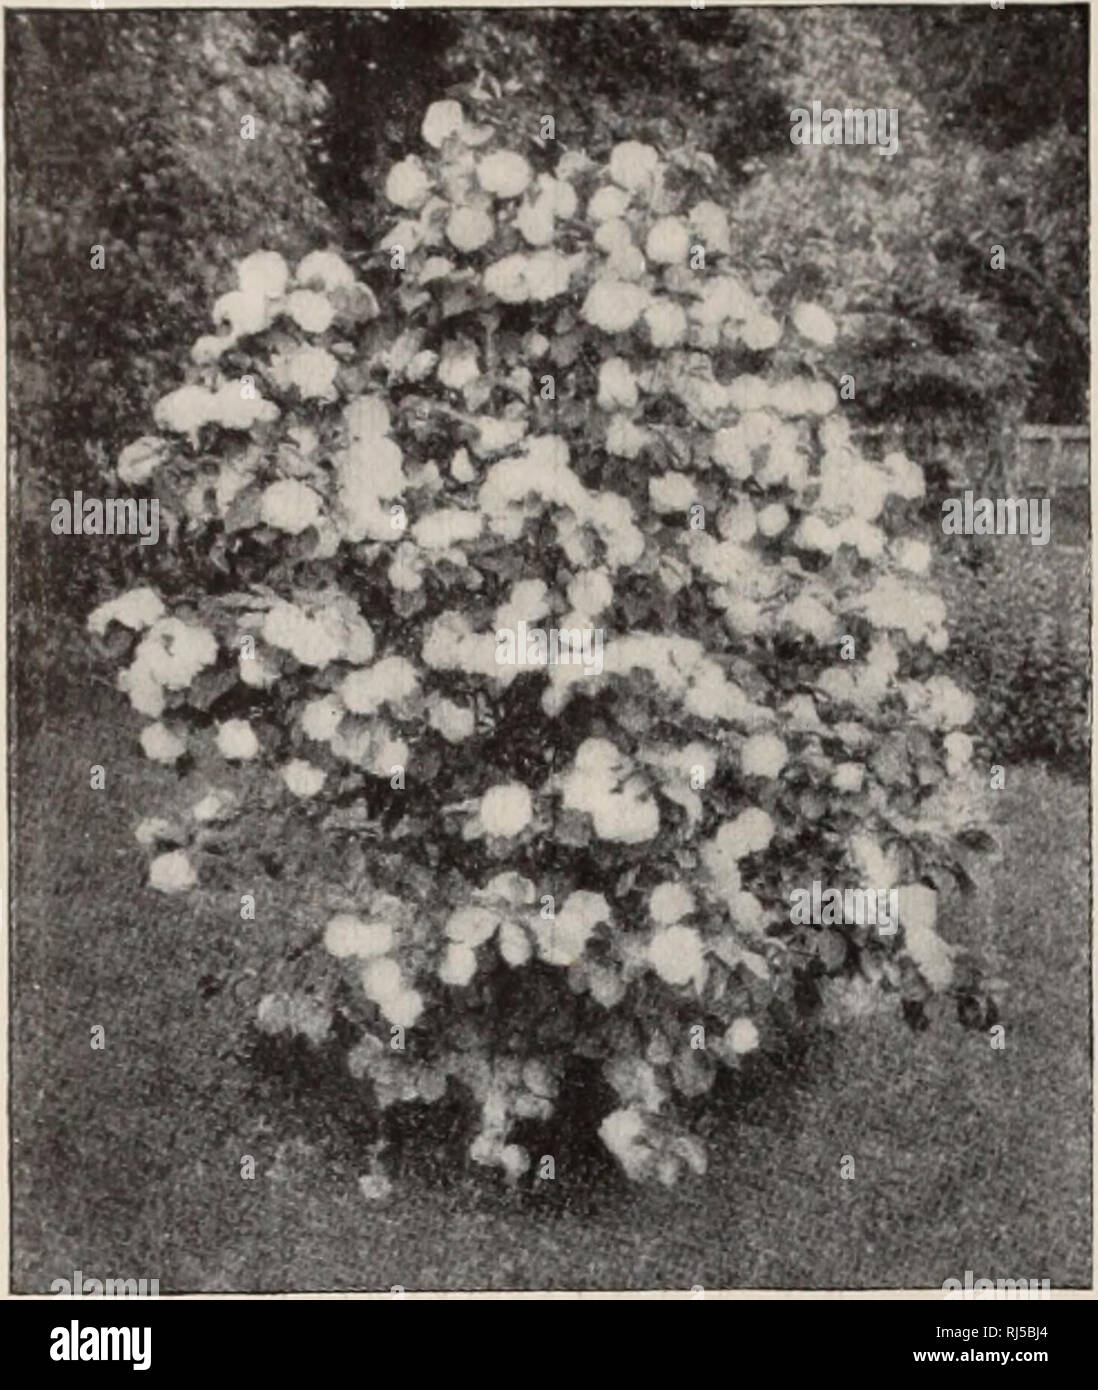 . Choice hardy trees and plants / F.W. Kelsey Nursery Company.. Nursery Catalogue. 46 FREDKRICK W. KKLSKY.. VIBURNUM PLICATUM. VACCINIUM vacillans (II). A smaller shrub than V. corymbosum ; produces the well-known blue- berry fruit of commerce. 25 and 35 cts. Low prices in quantity. VIBURNUM acerifolium. Mapi.e-Leax kd Vi- BUKNiM (II). Flat clusters of white flowers in early spring: dark berries in autumn. 35 cts. VIBURNUM cassinoides (II). Rich gfreen leaves and white flowers in June; handsome dark red berries in fall. 25 cts. VIBURNUM Cotinifolum. A fine variety; white flowers in early sprin Stock Photo